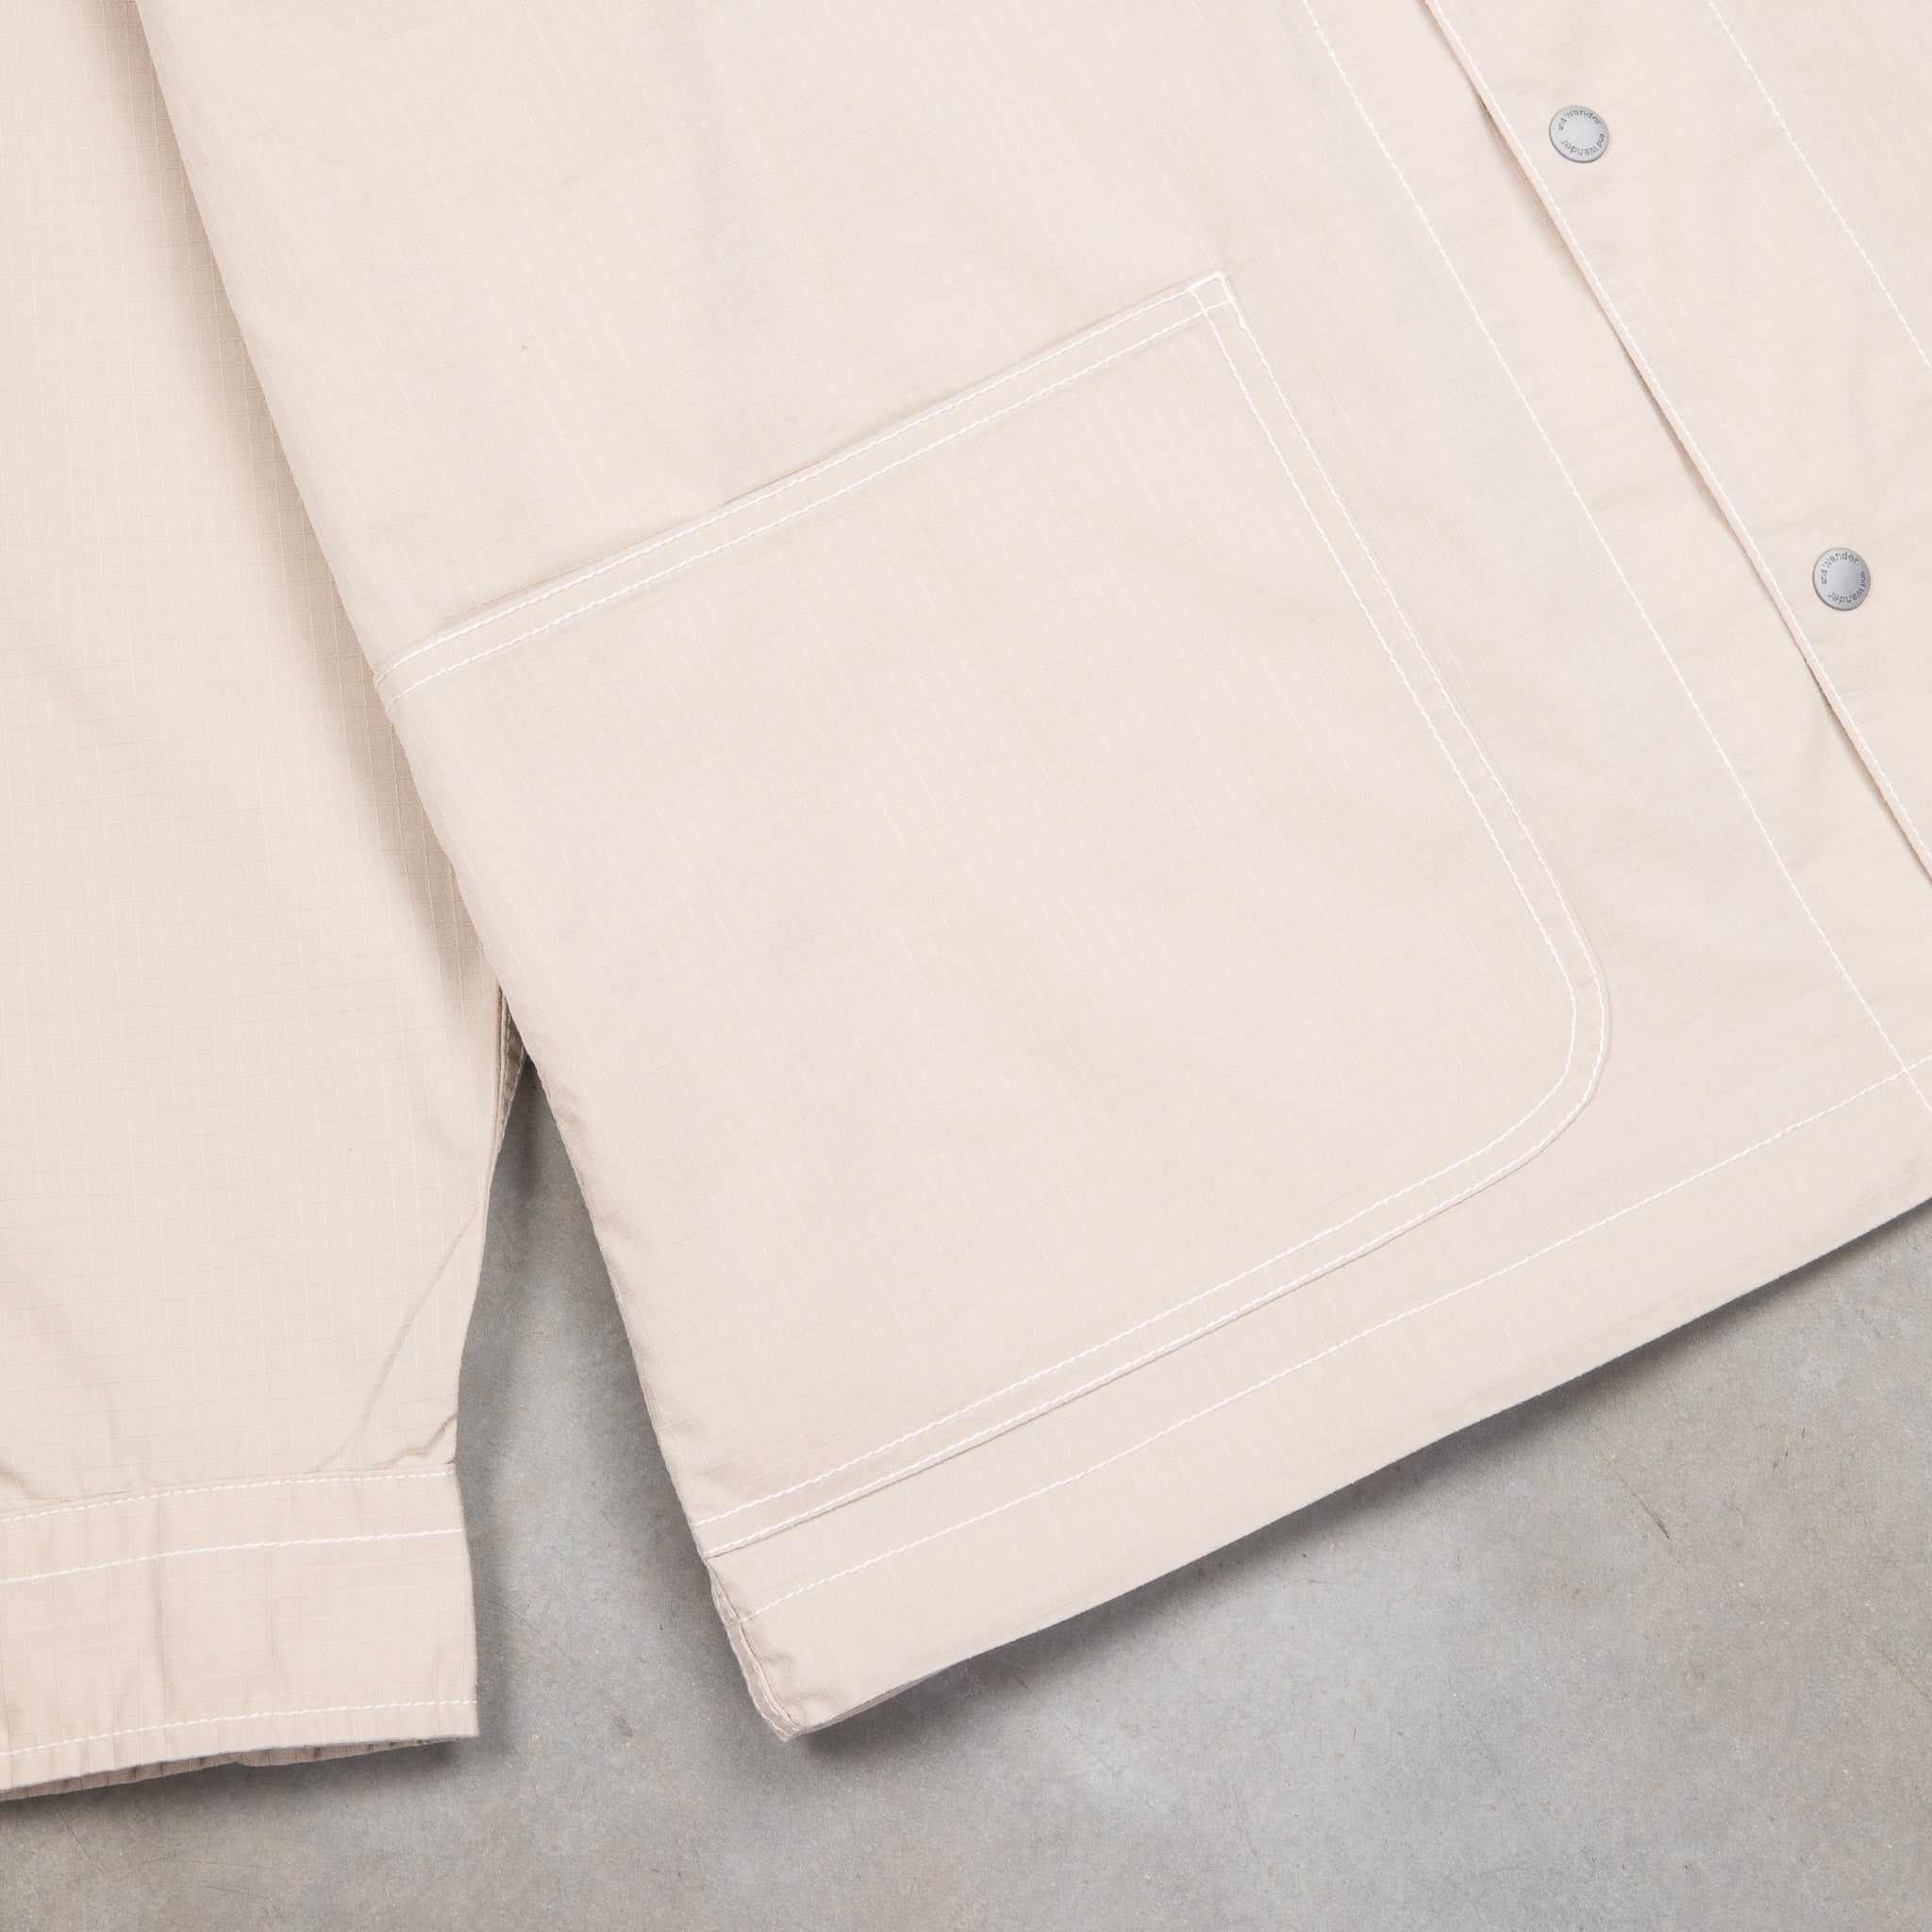 And Wander Dry Rip Shirt Jacket L. Beige